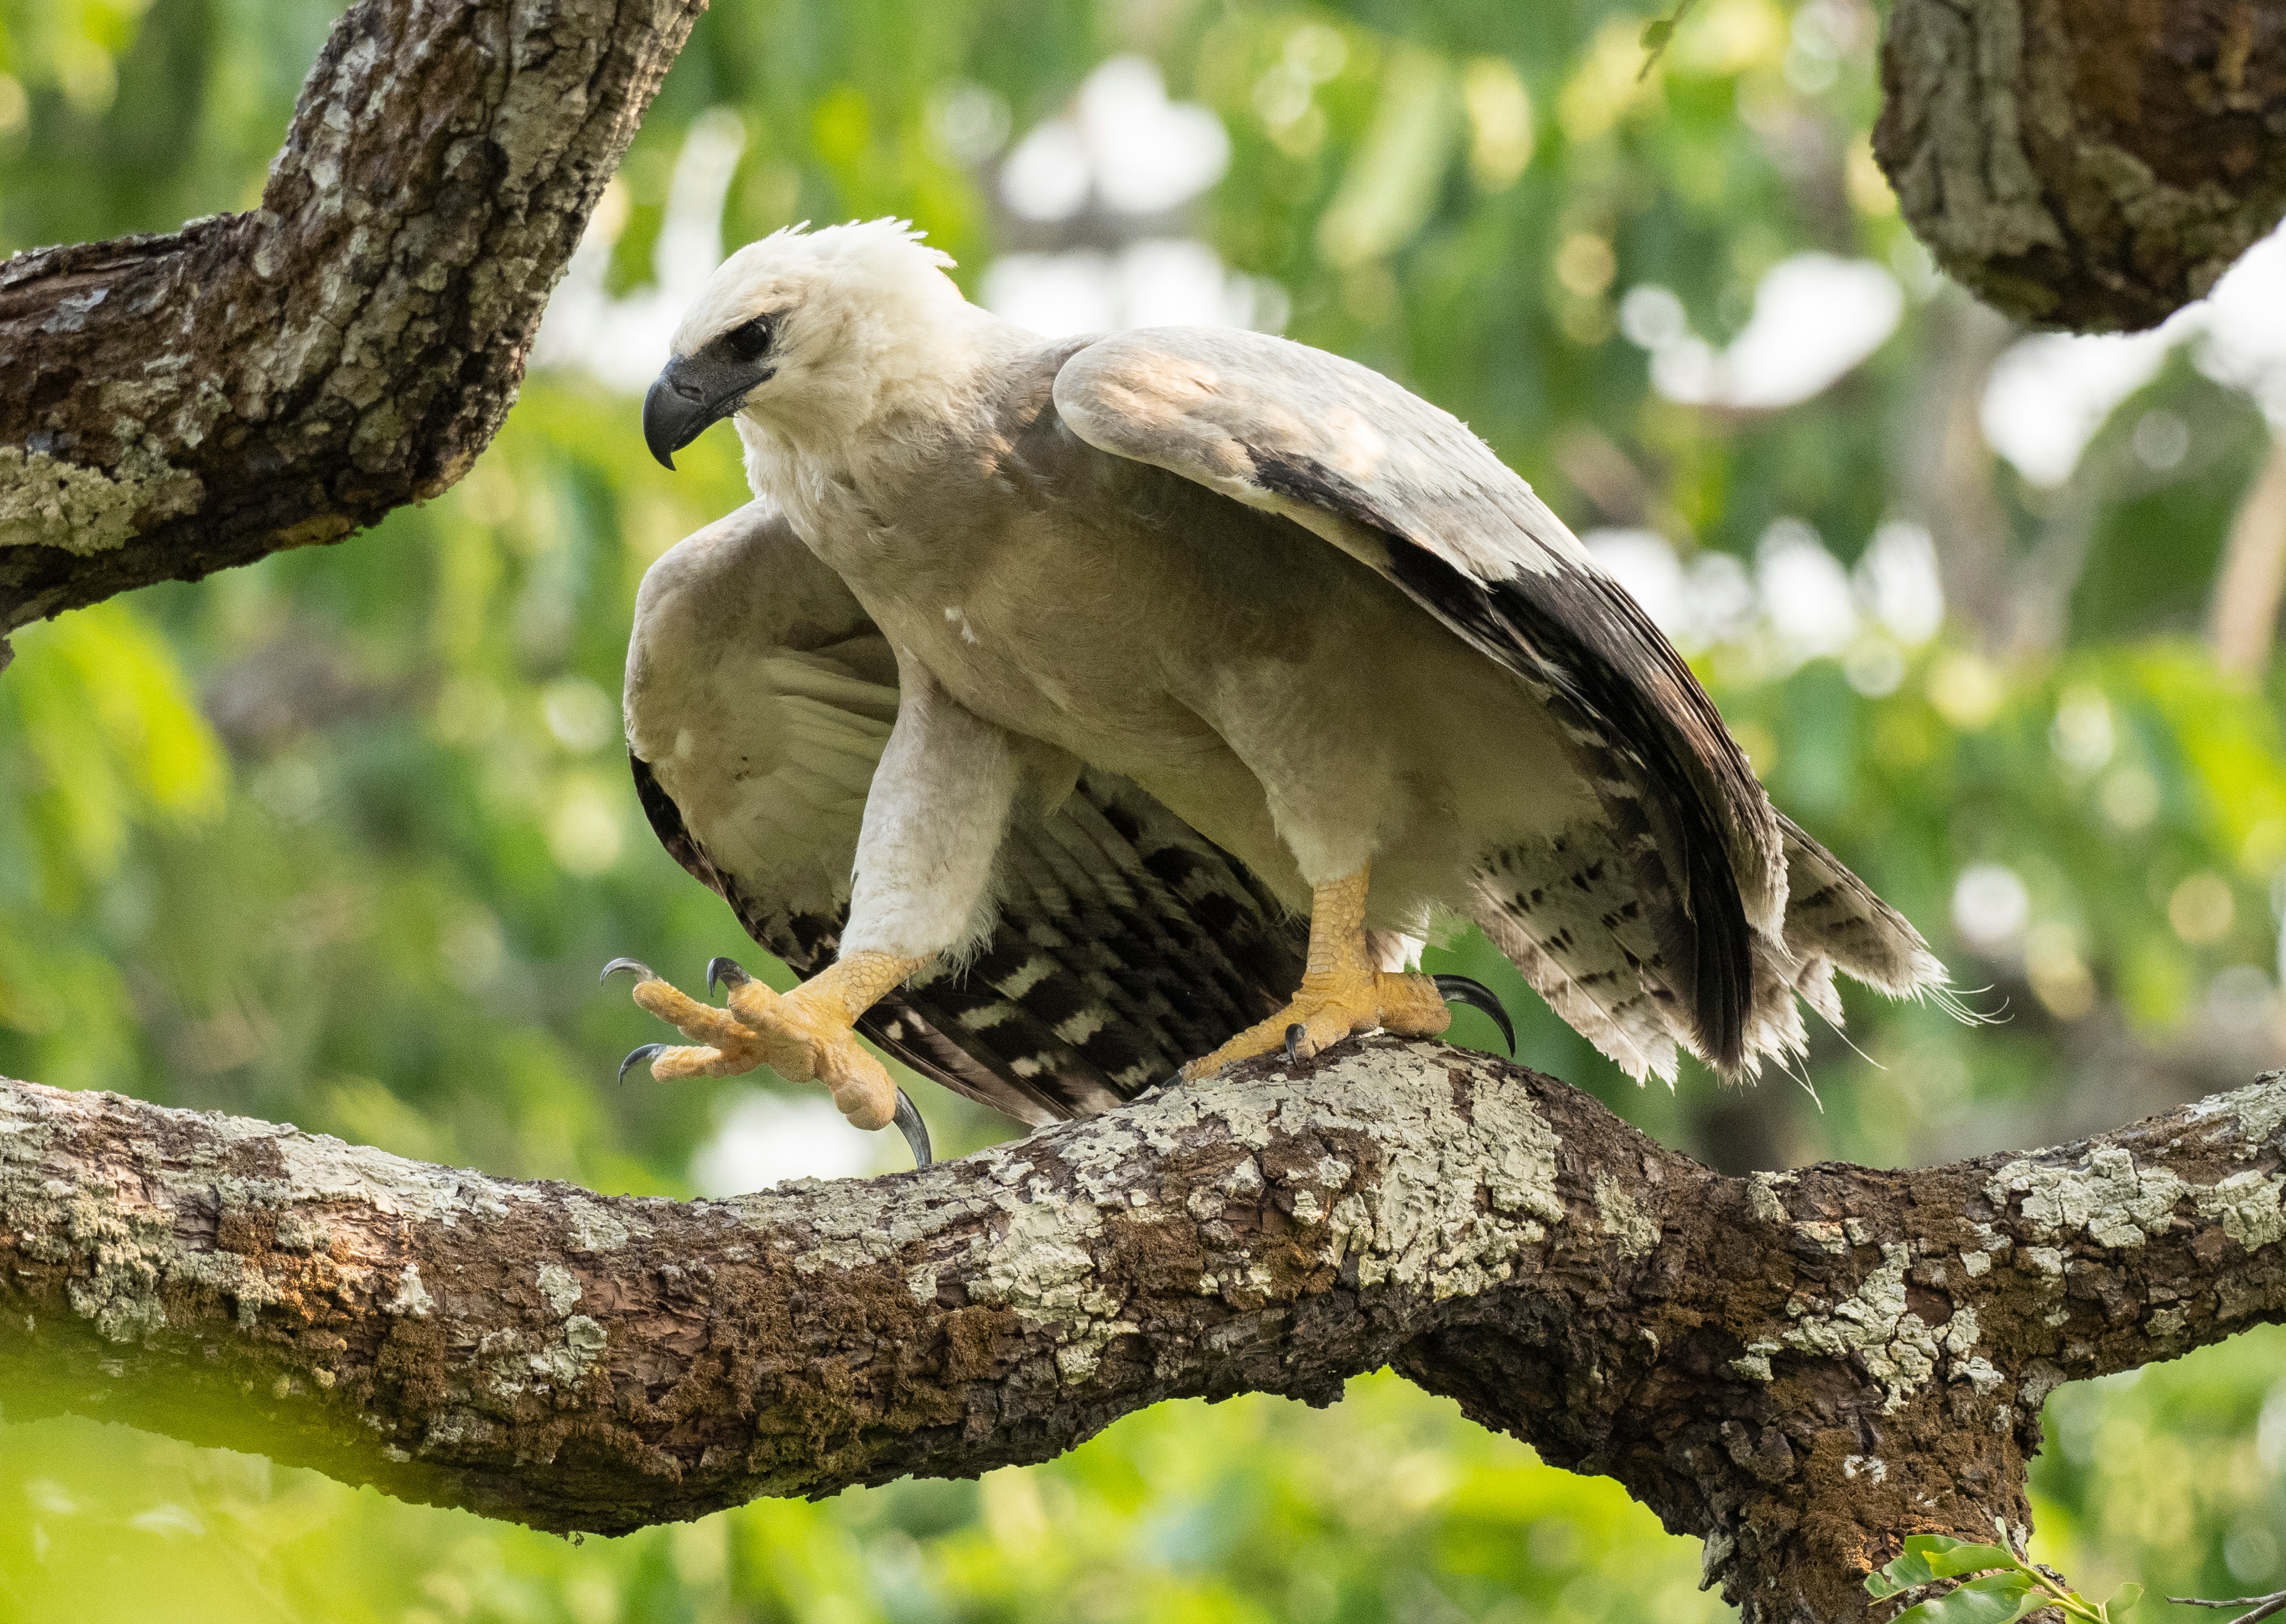 Harpy eagle in a tree